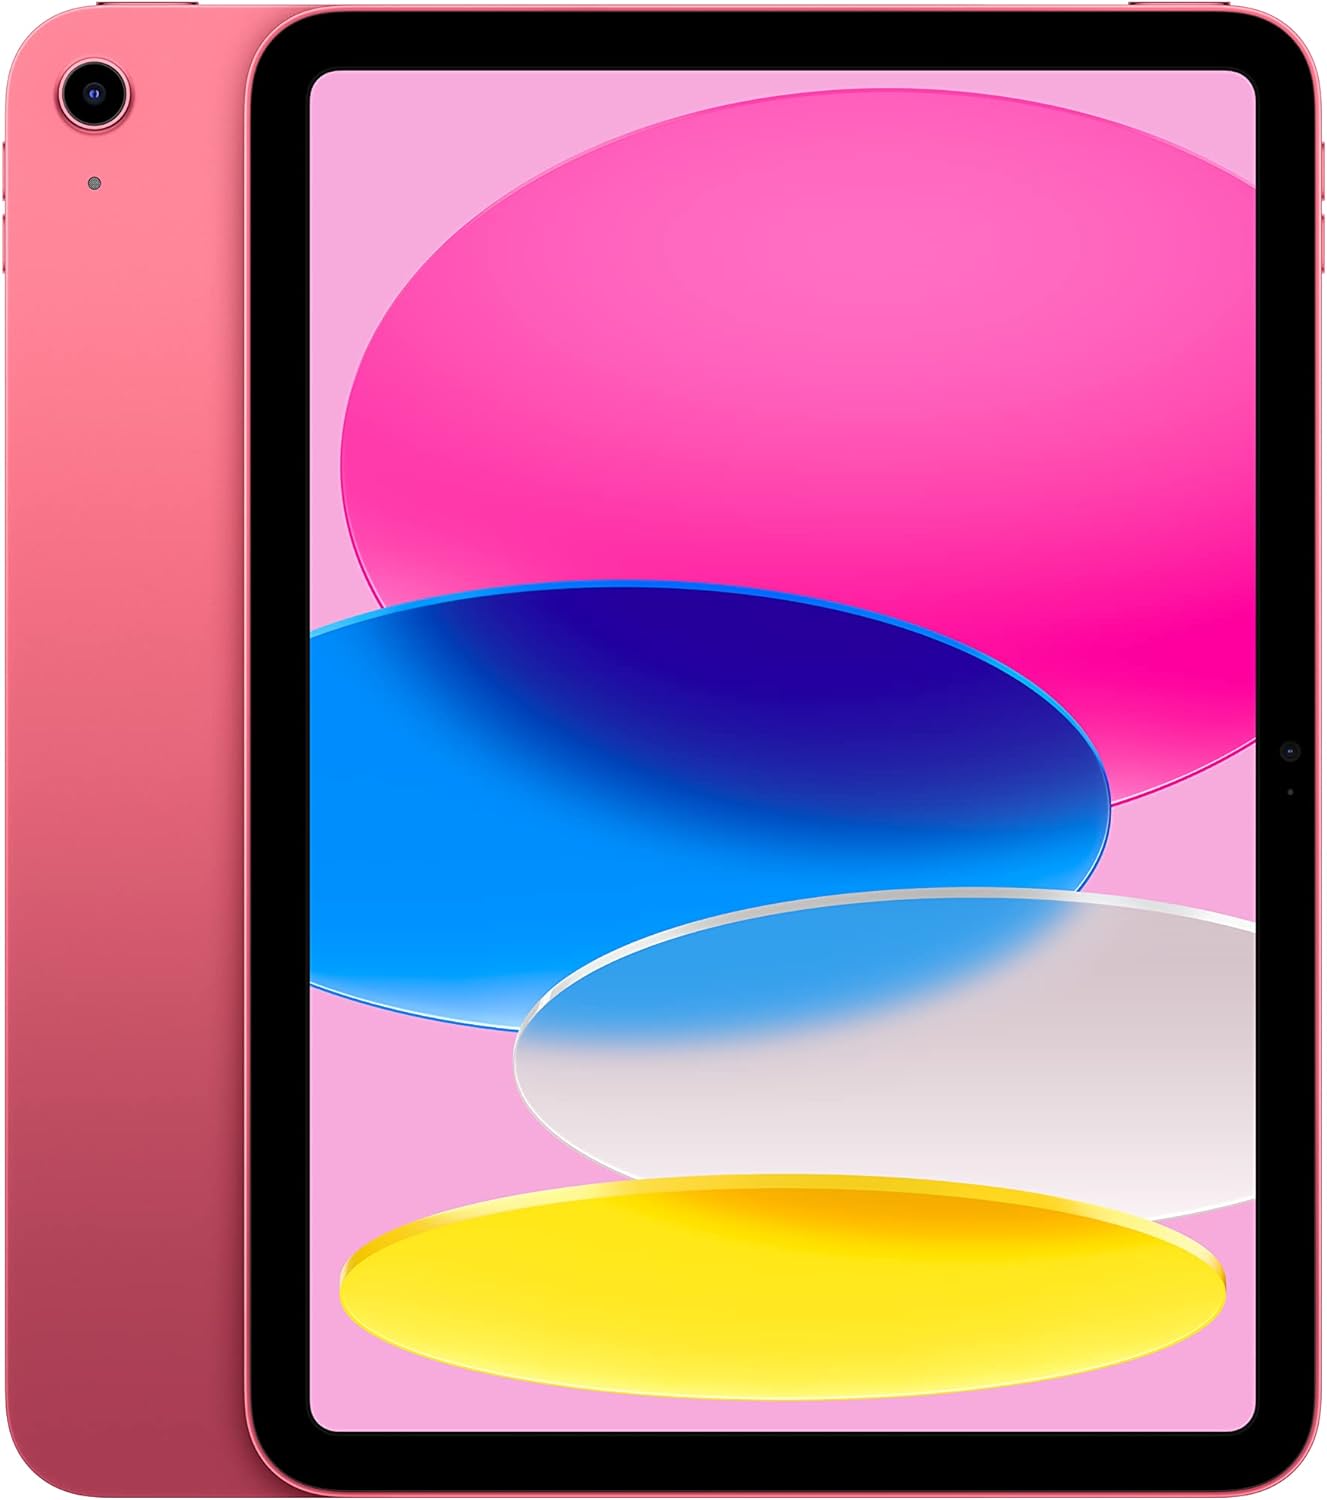 Apple iPad (10th Generation): with A14 Bionic chip, 10.9-inch Liquid Retina Display, 64GB, Wi-Fi 6, 12MP front/12MP Back Camera, Touch ID, All-Day Battery Life – Pink